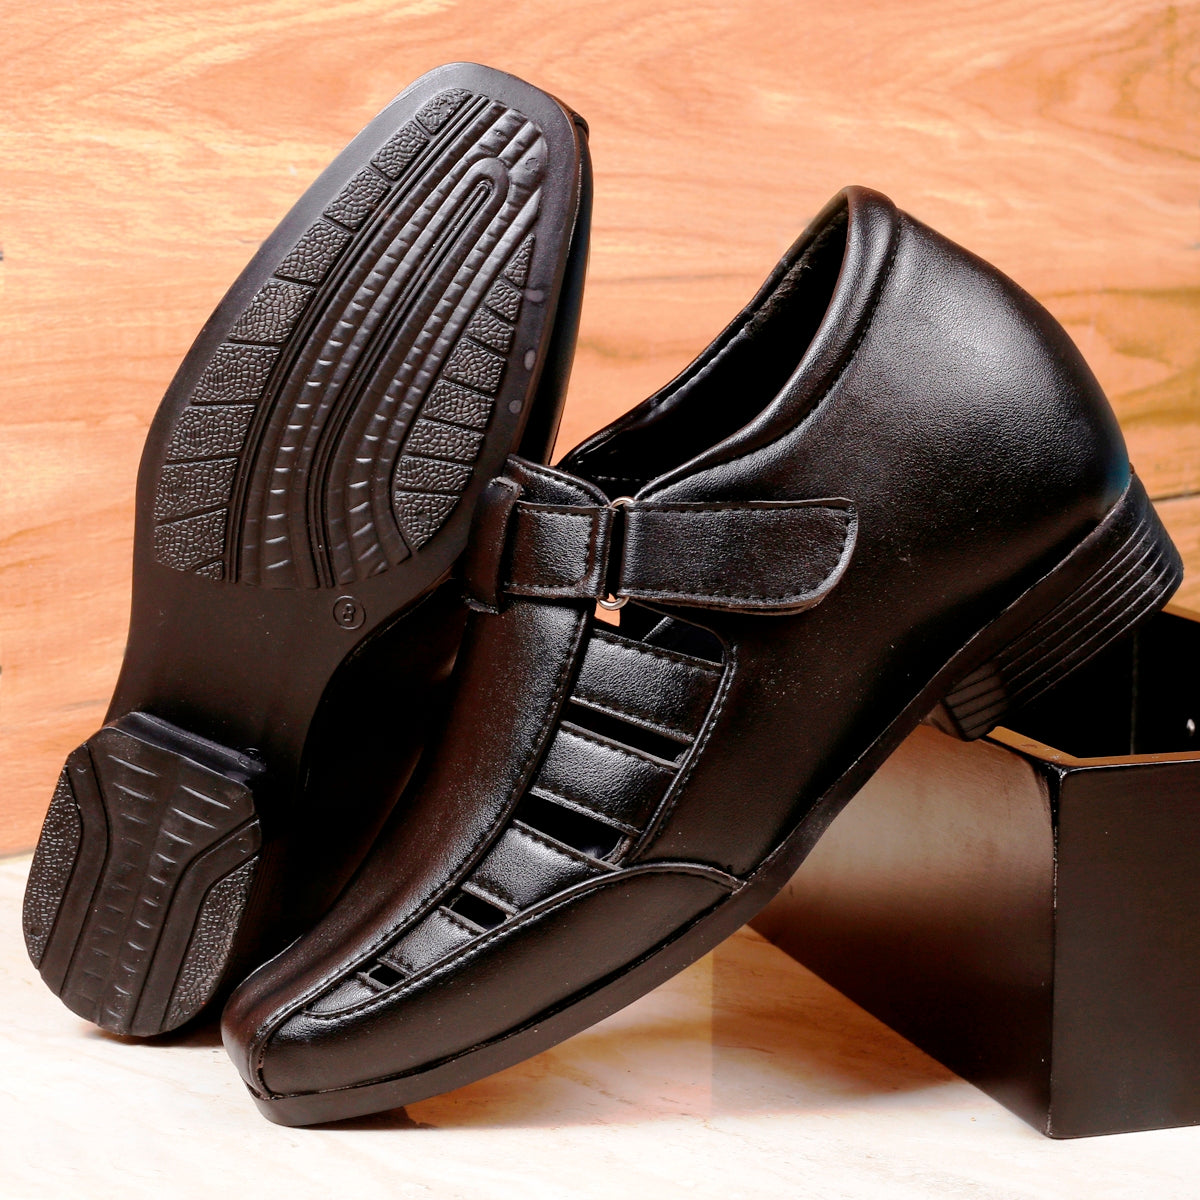 Bxxy's 3 Inch Hidden Height Increasing Elevator Faux Leather Sandals for Men